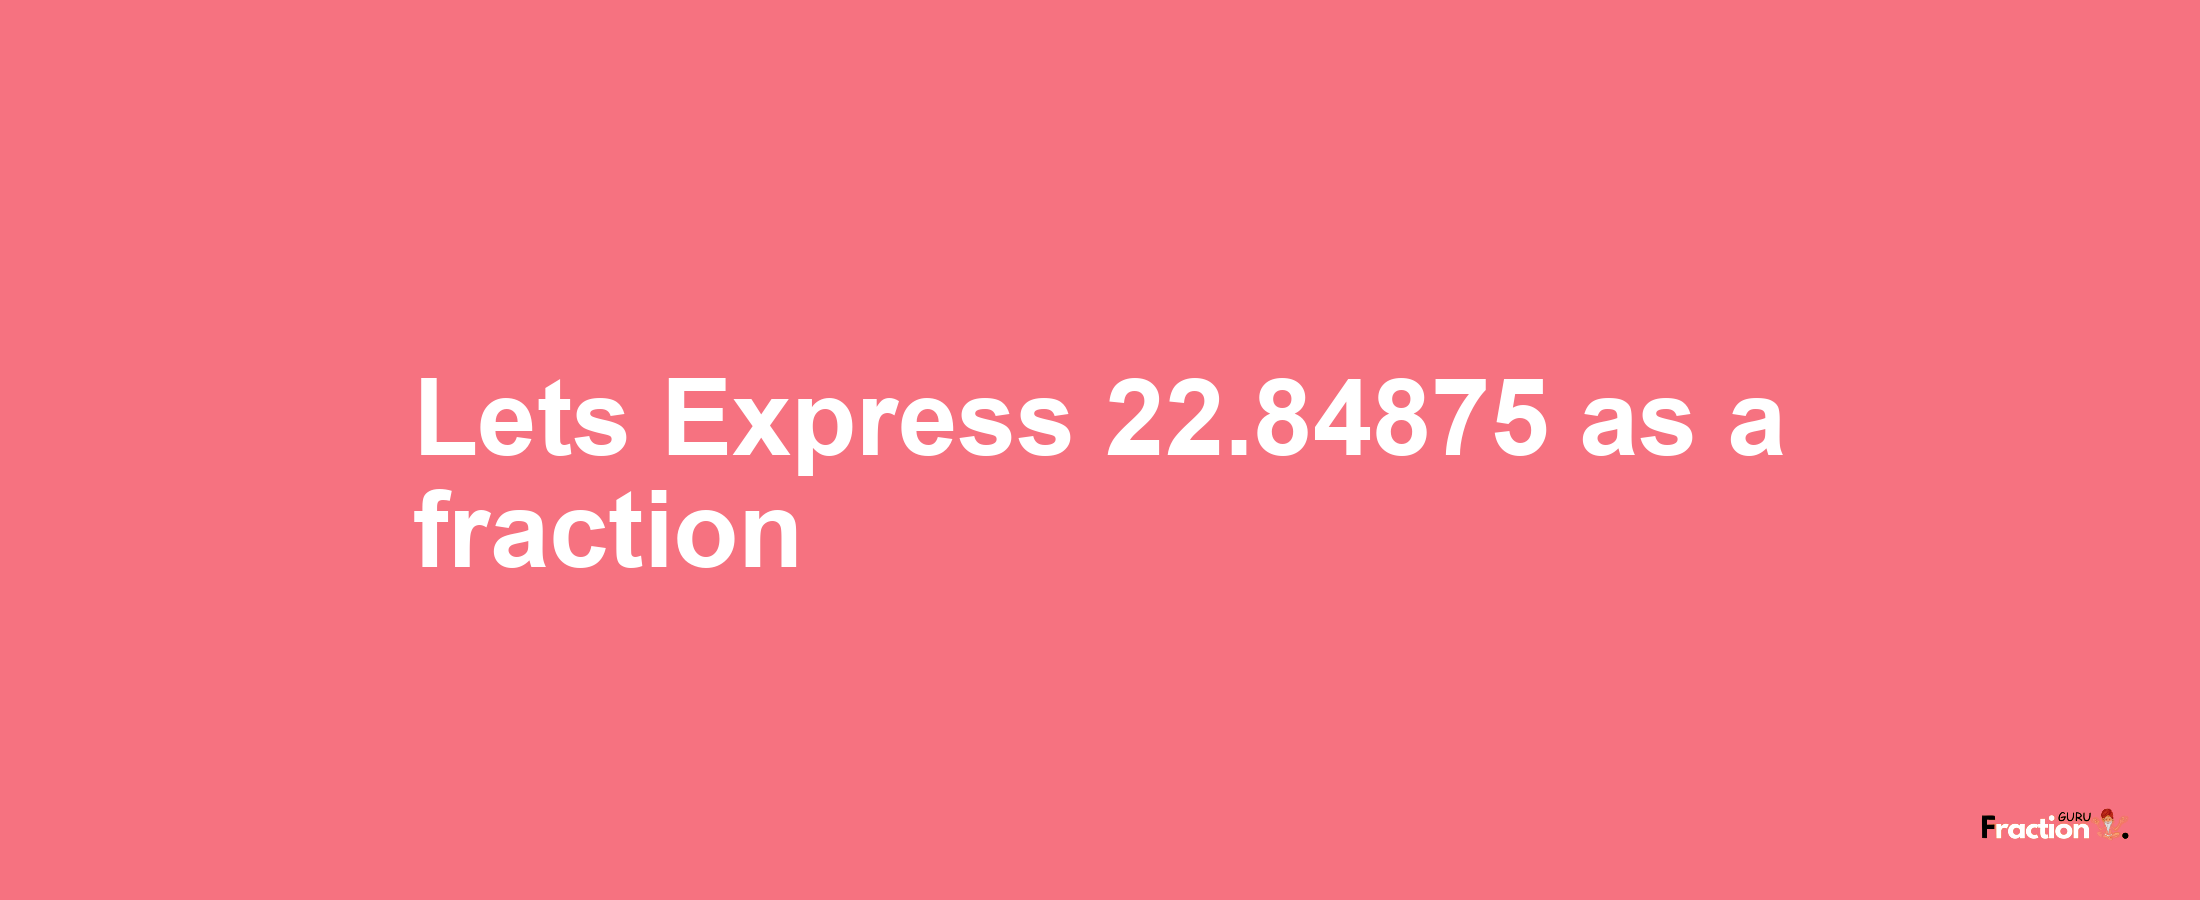 Lets Express 22.84875 as afraction